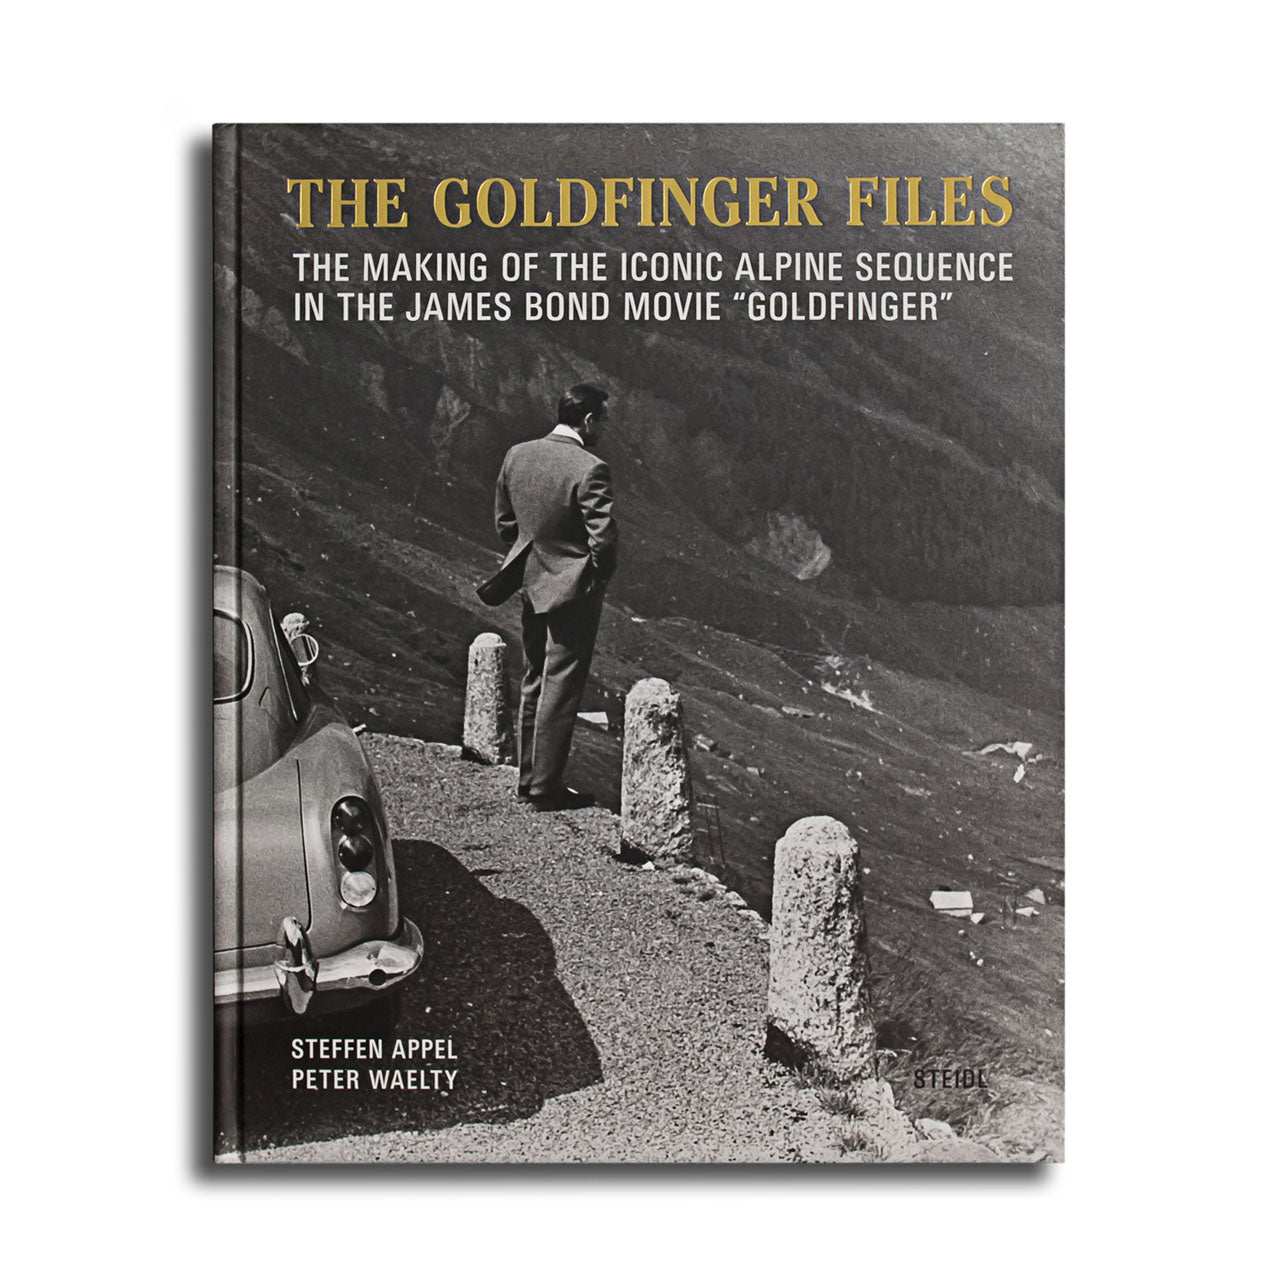 The Goldfinger Files